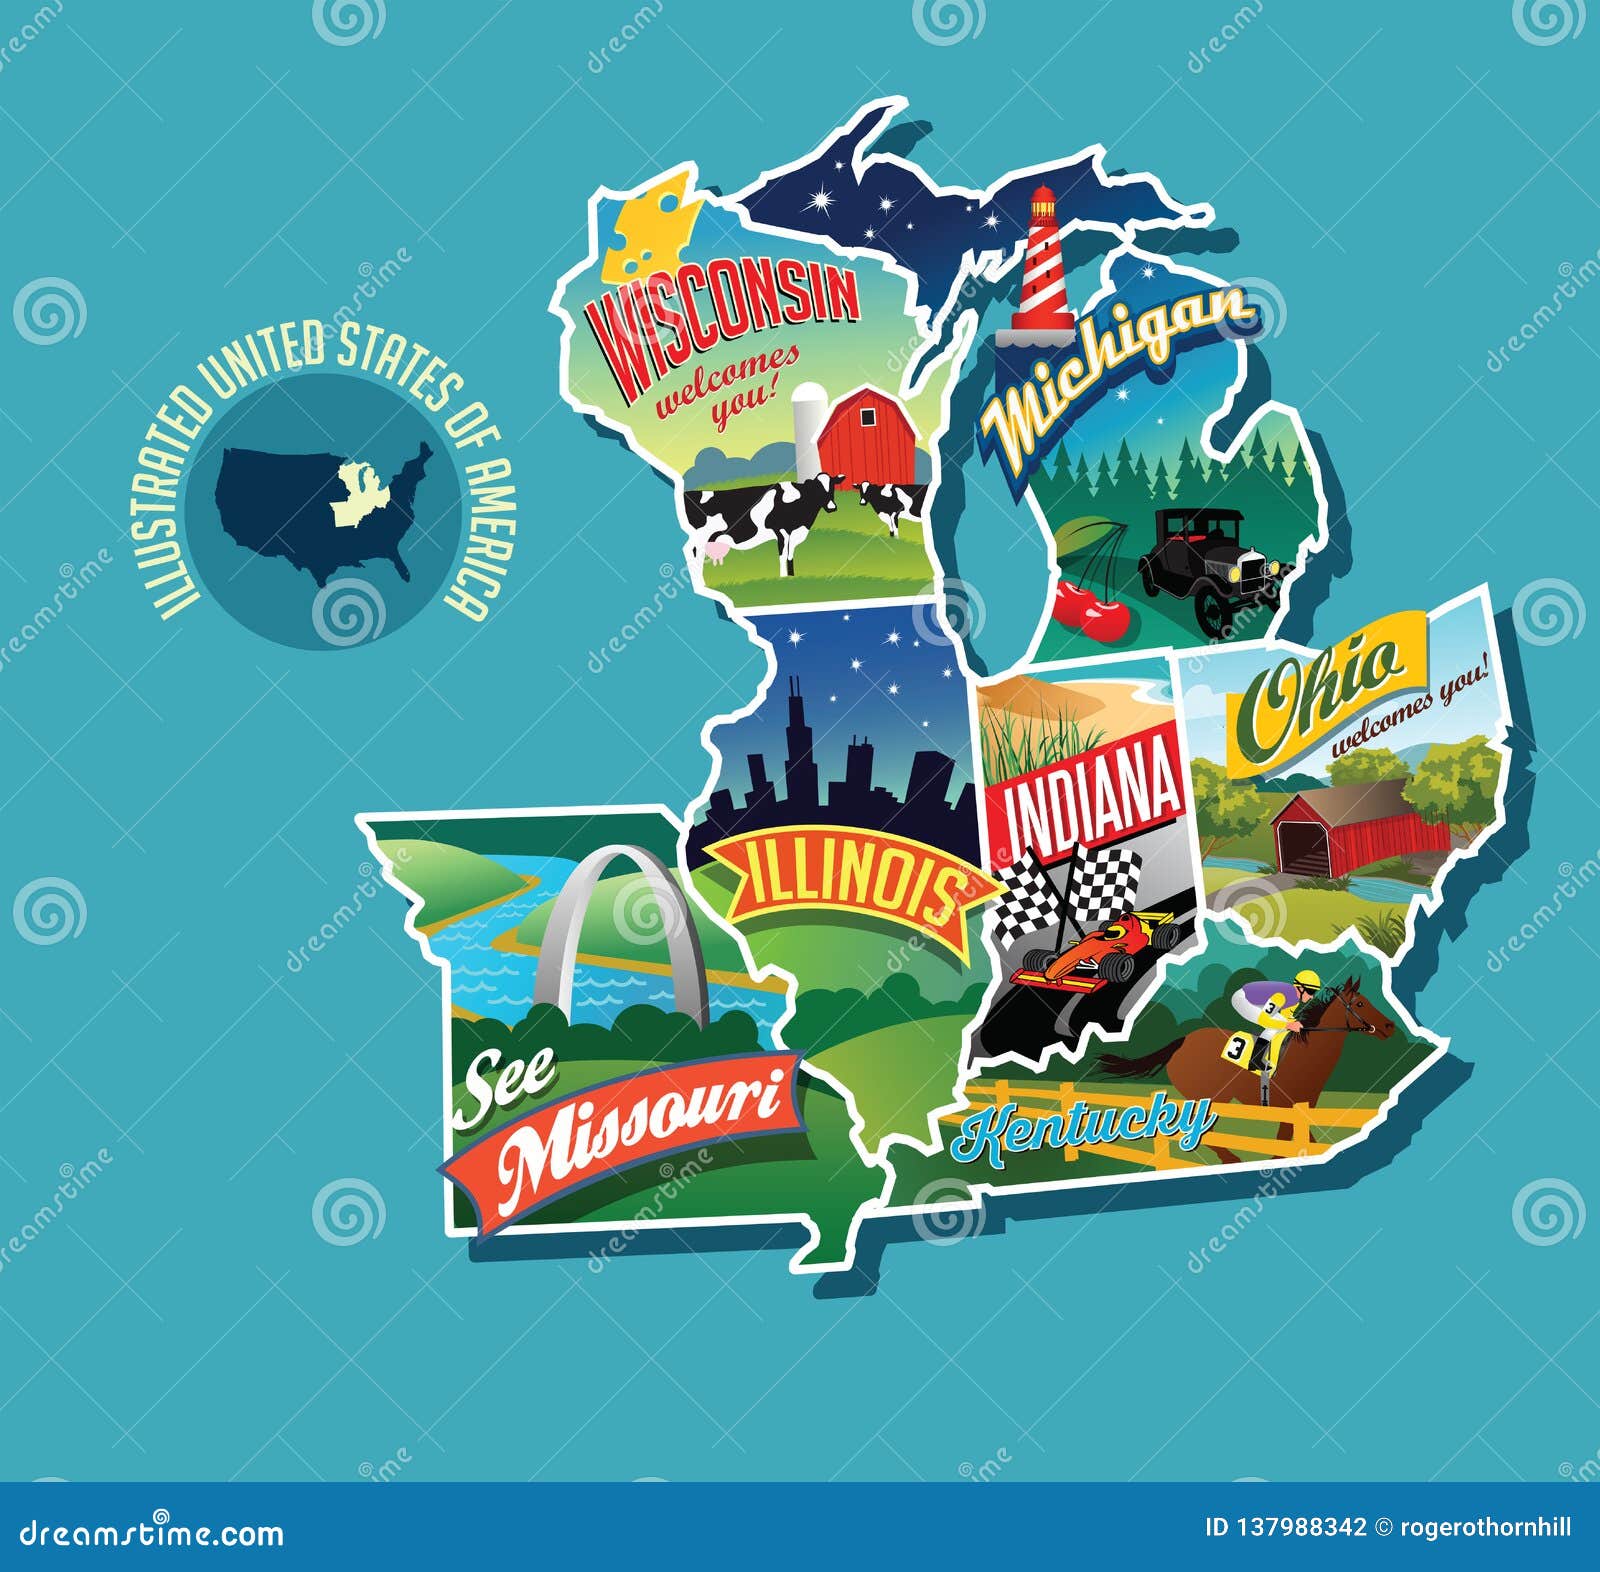 illustrated pictorial map of midwest united states.